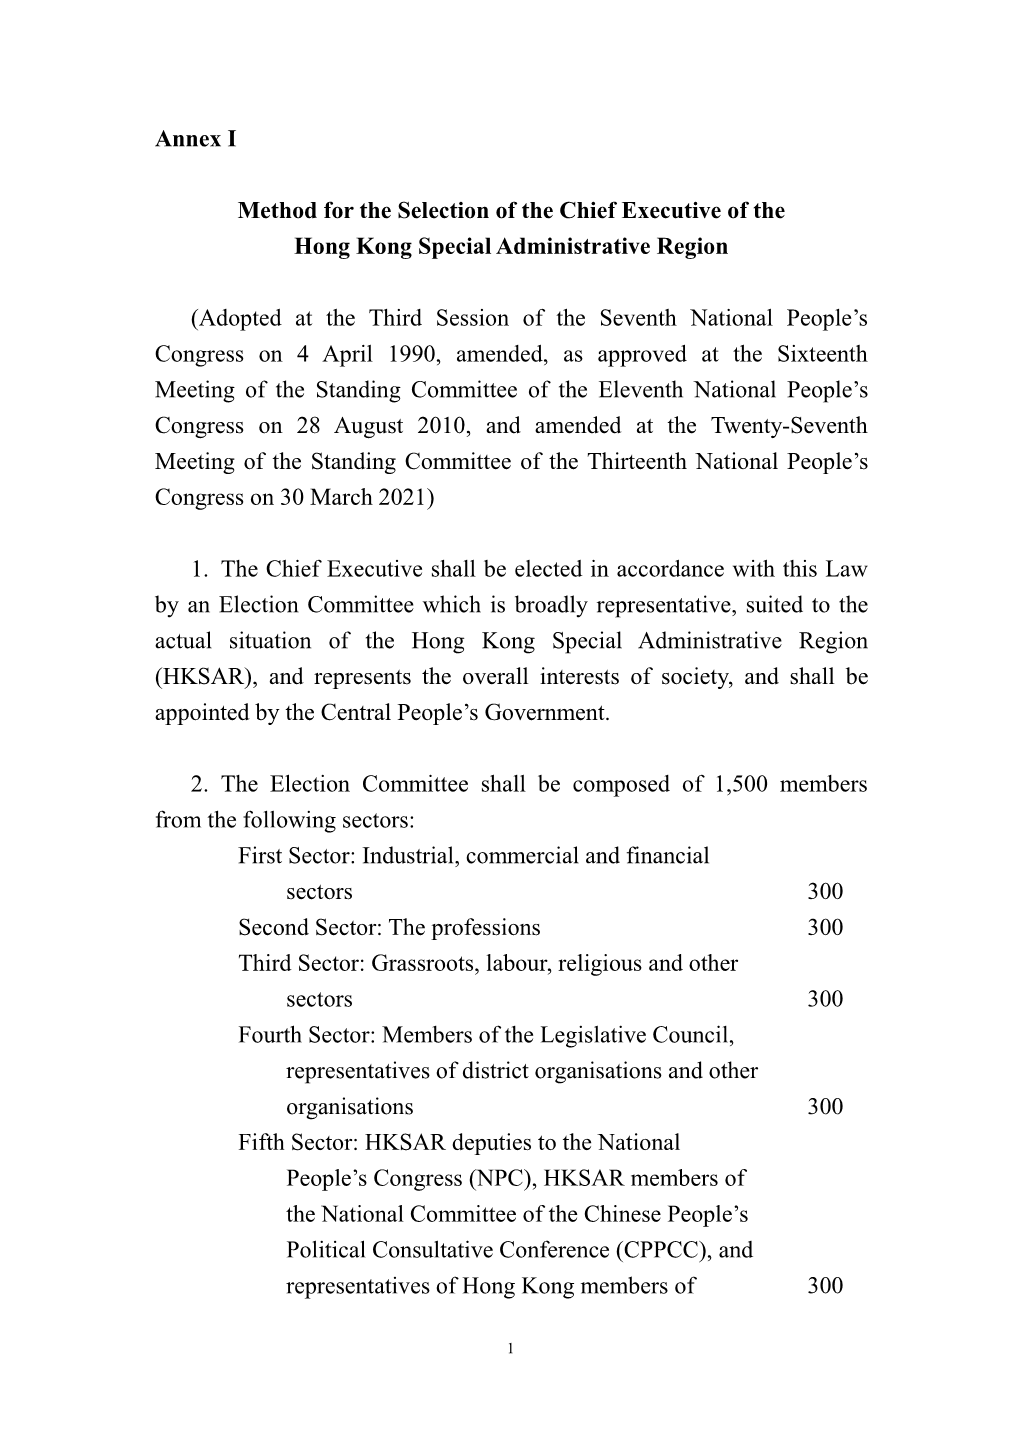 Annex I Method for the Selection of the Chief Executive of the Hong Kong